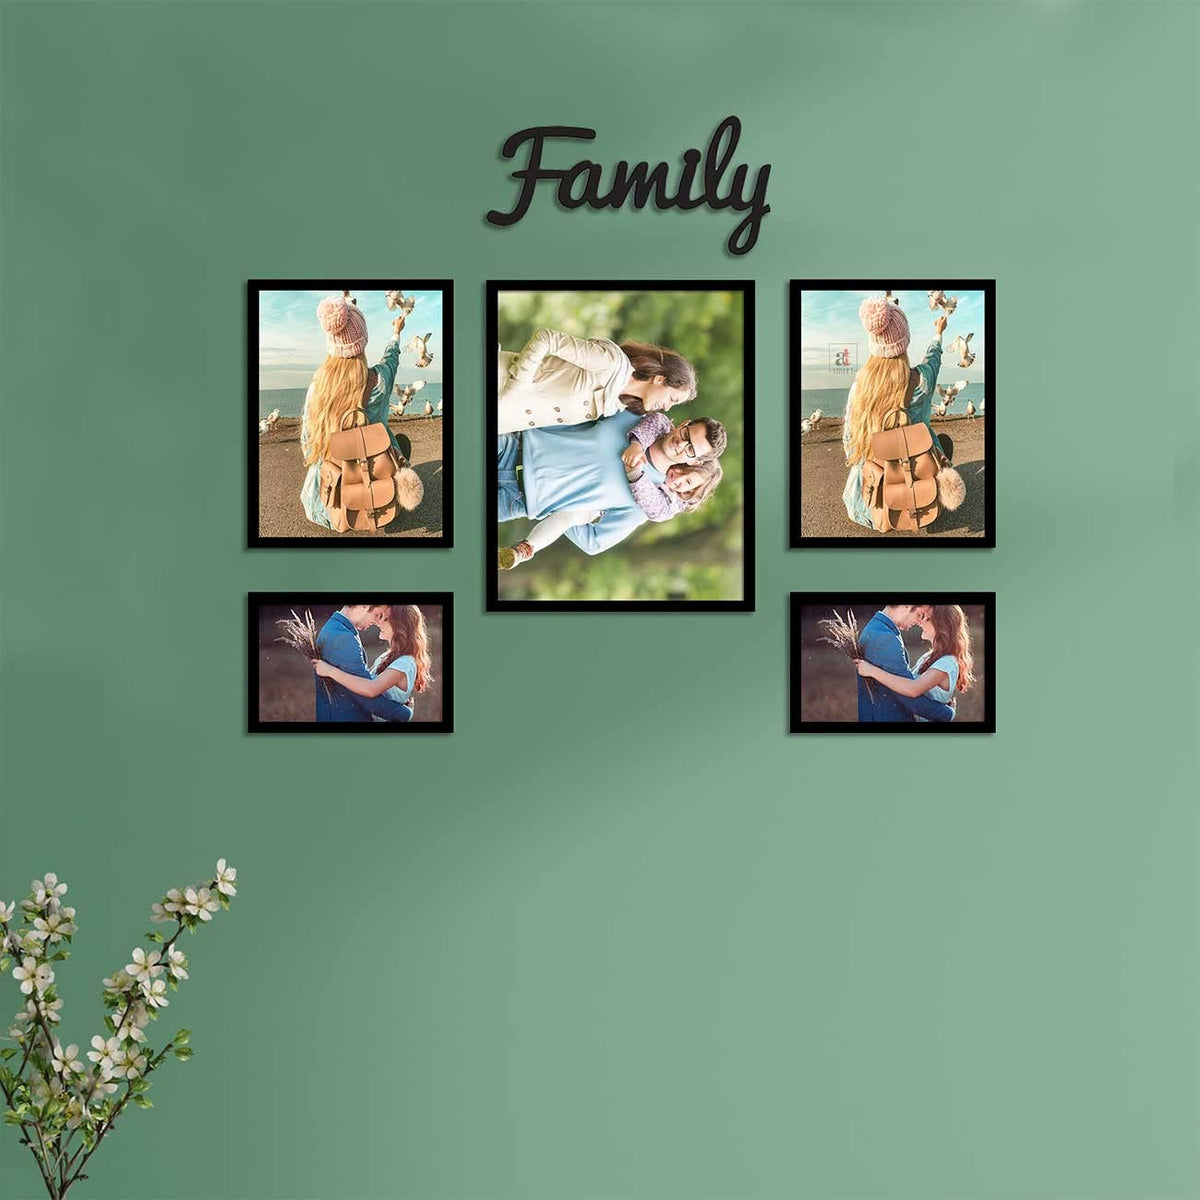 Family Photo Frame With Family